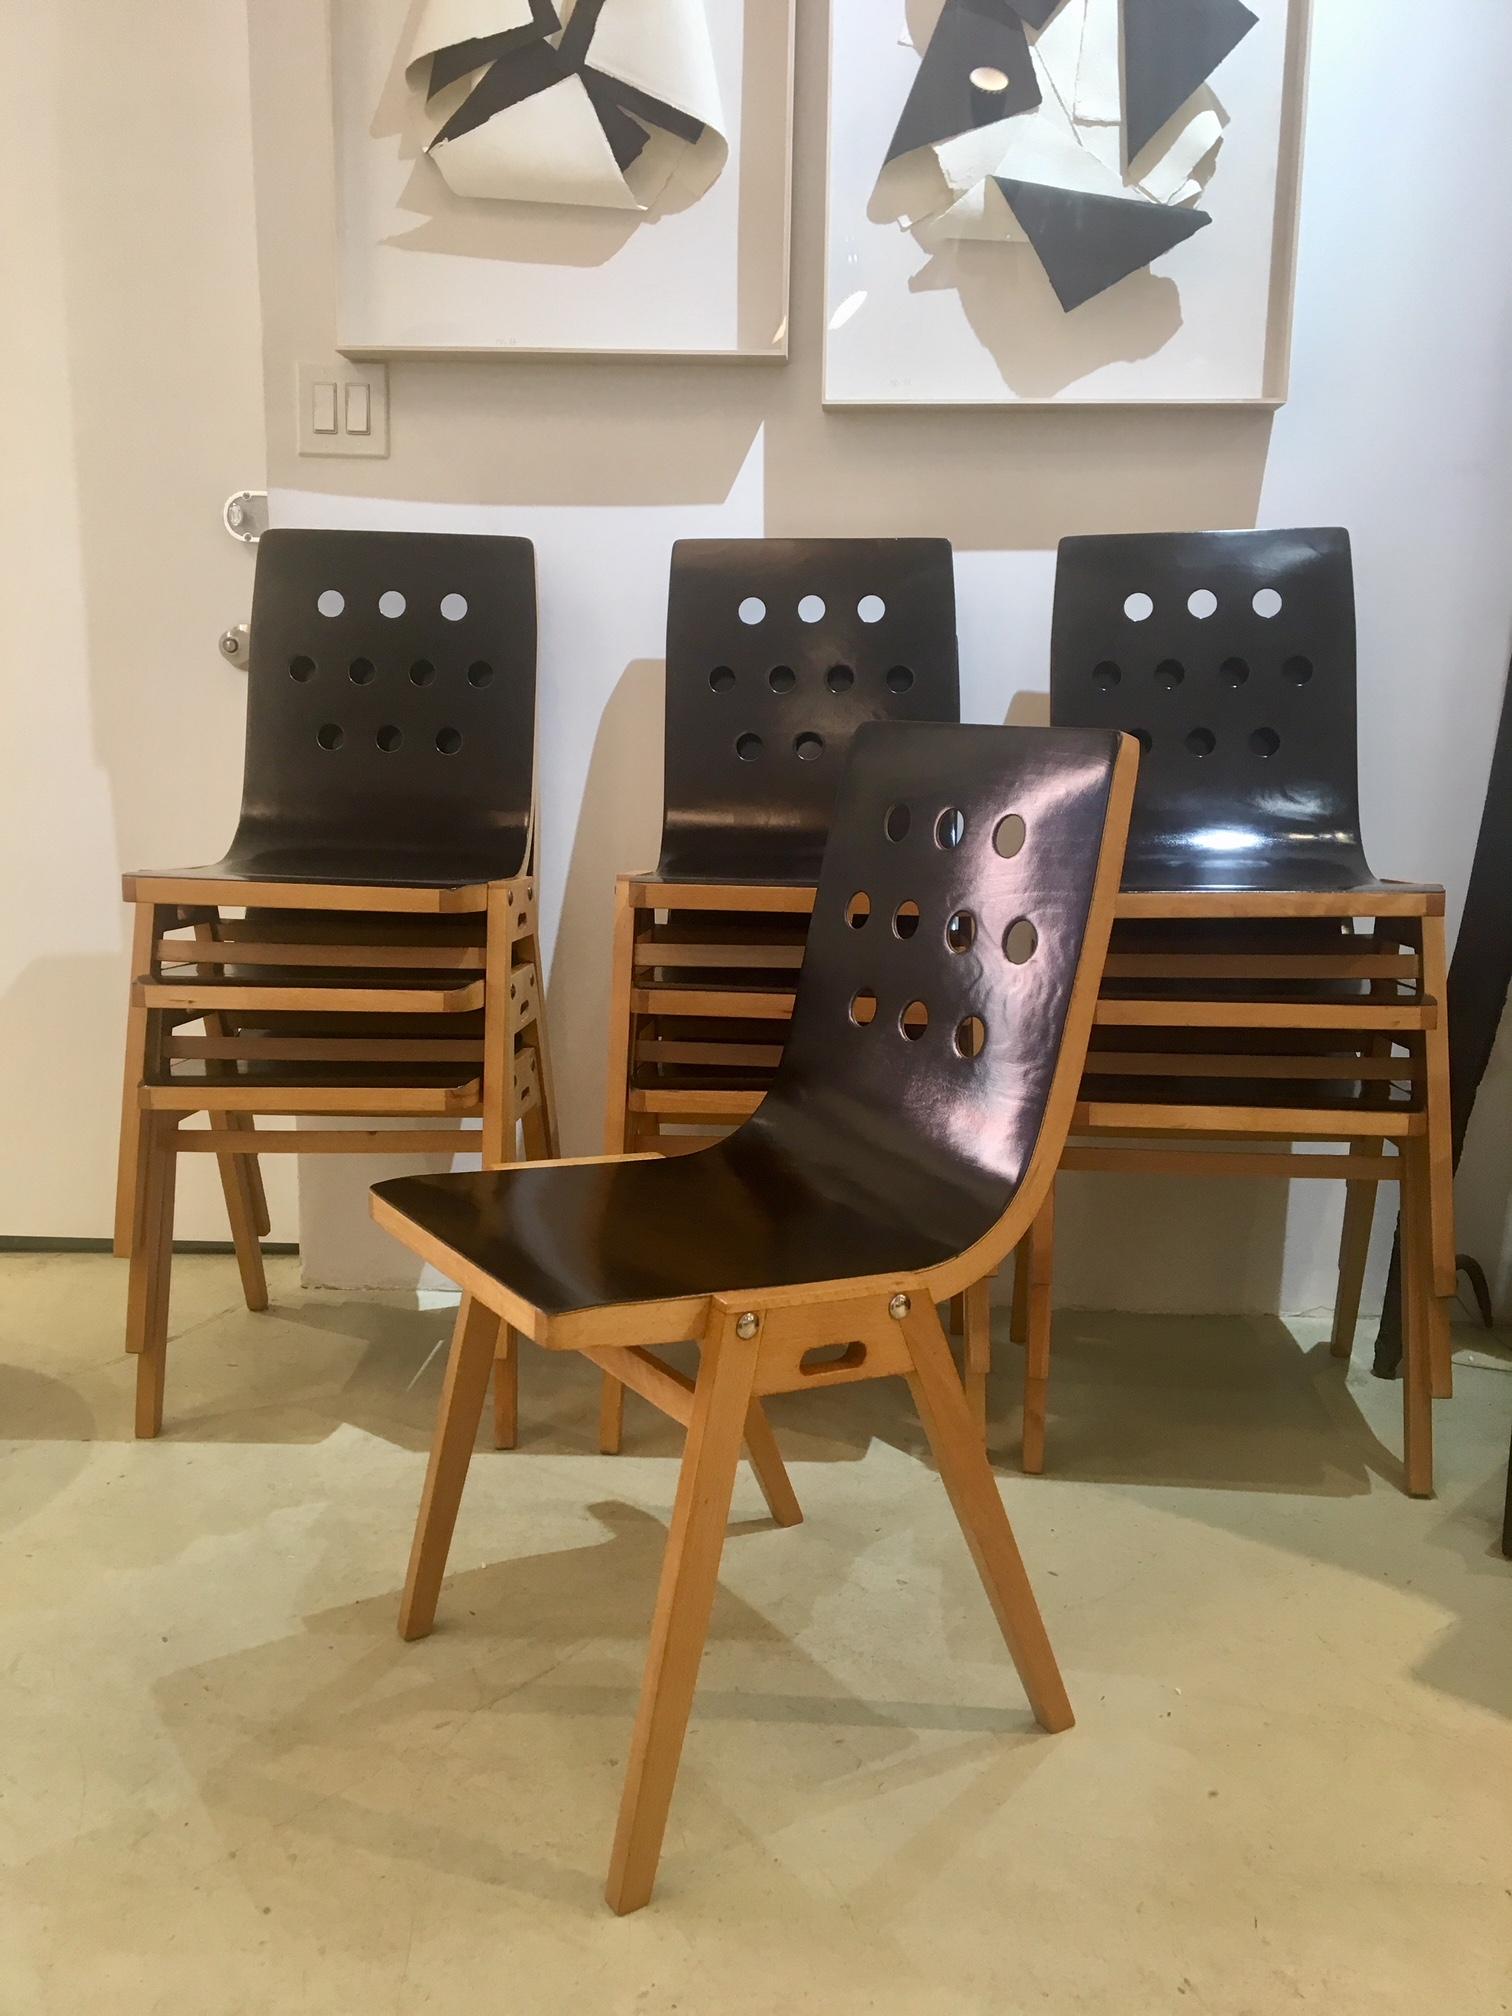 A beautiful set of ten Roland Rainer stackable chairs, created for Vienna Stadthalle, 1951. Chairs are constructed of natural beechwood and lacquered beech plywood. Excellent restored condition.
Please don't hesitate to ask for additional images, or